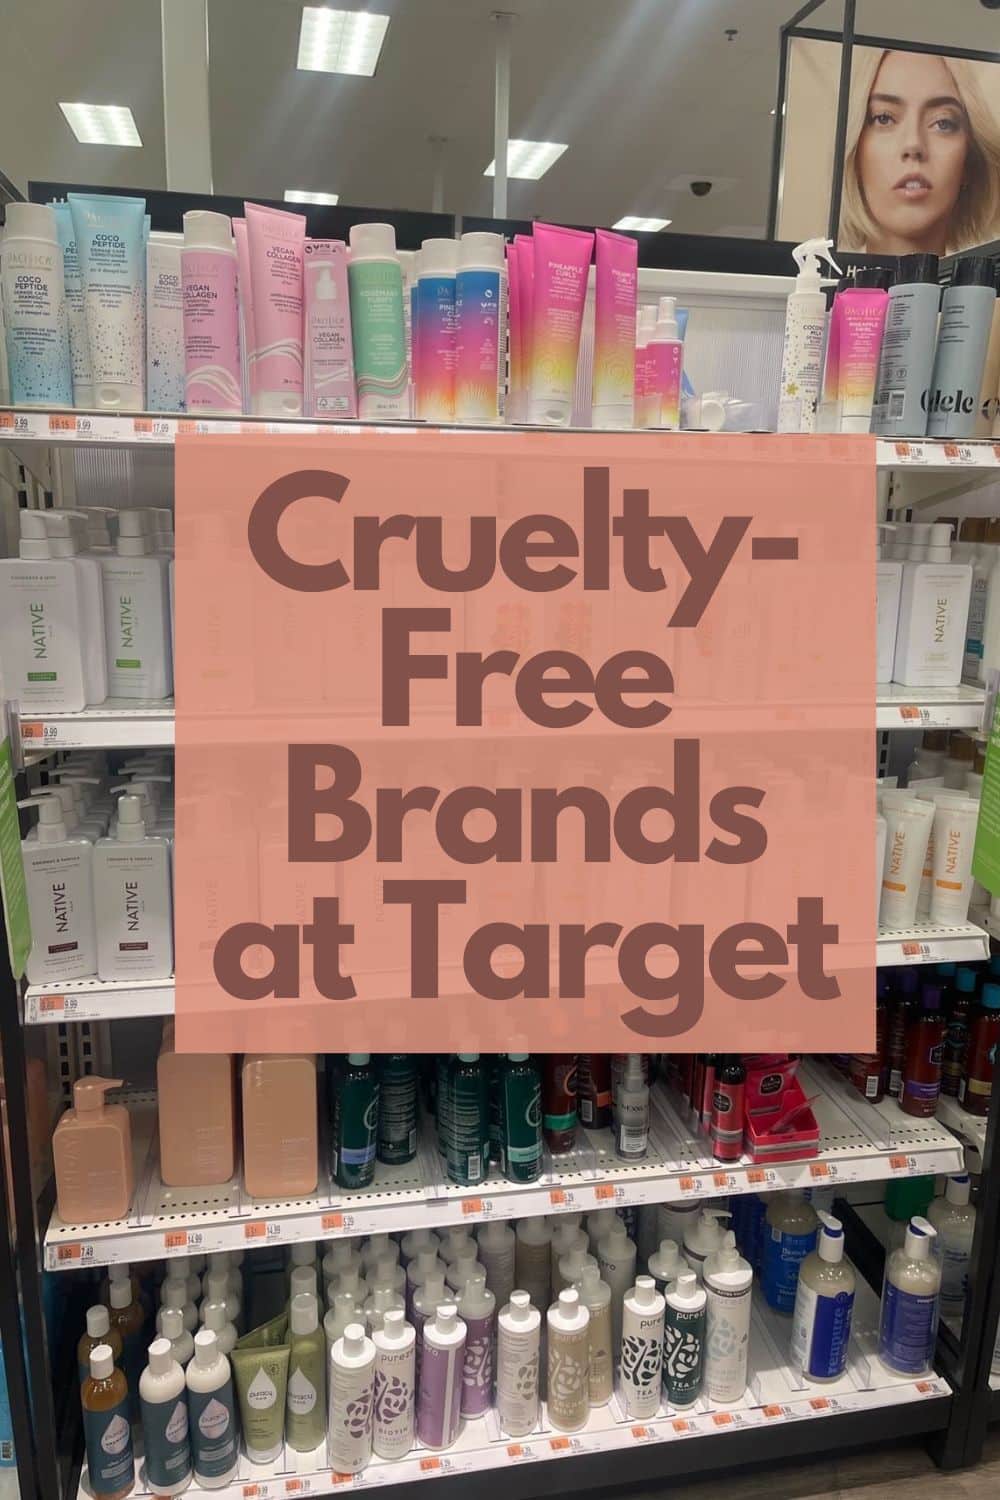 Cruelty-Free Brands at Target